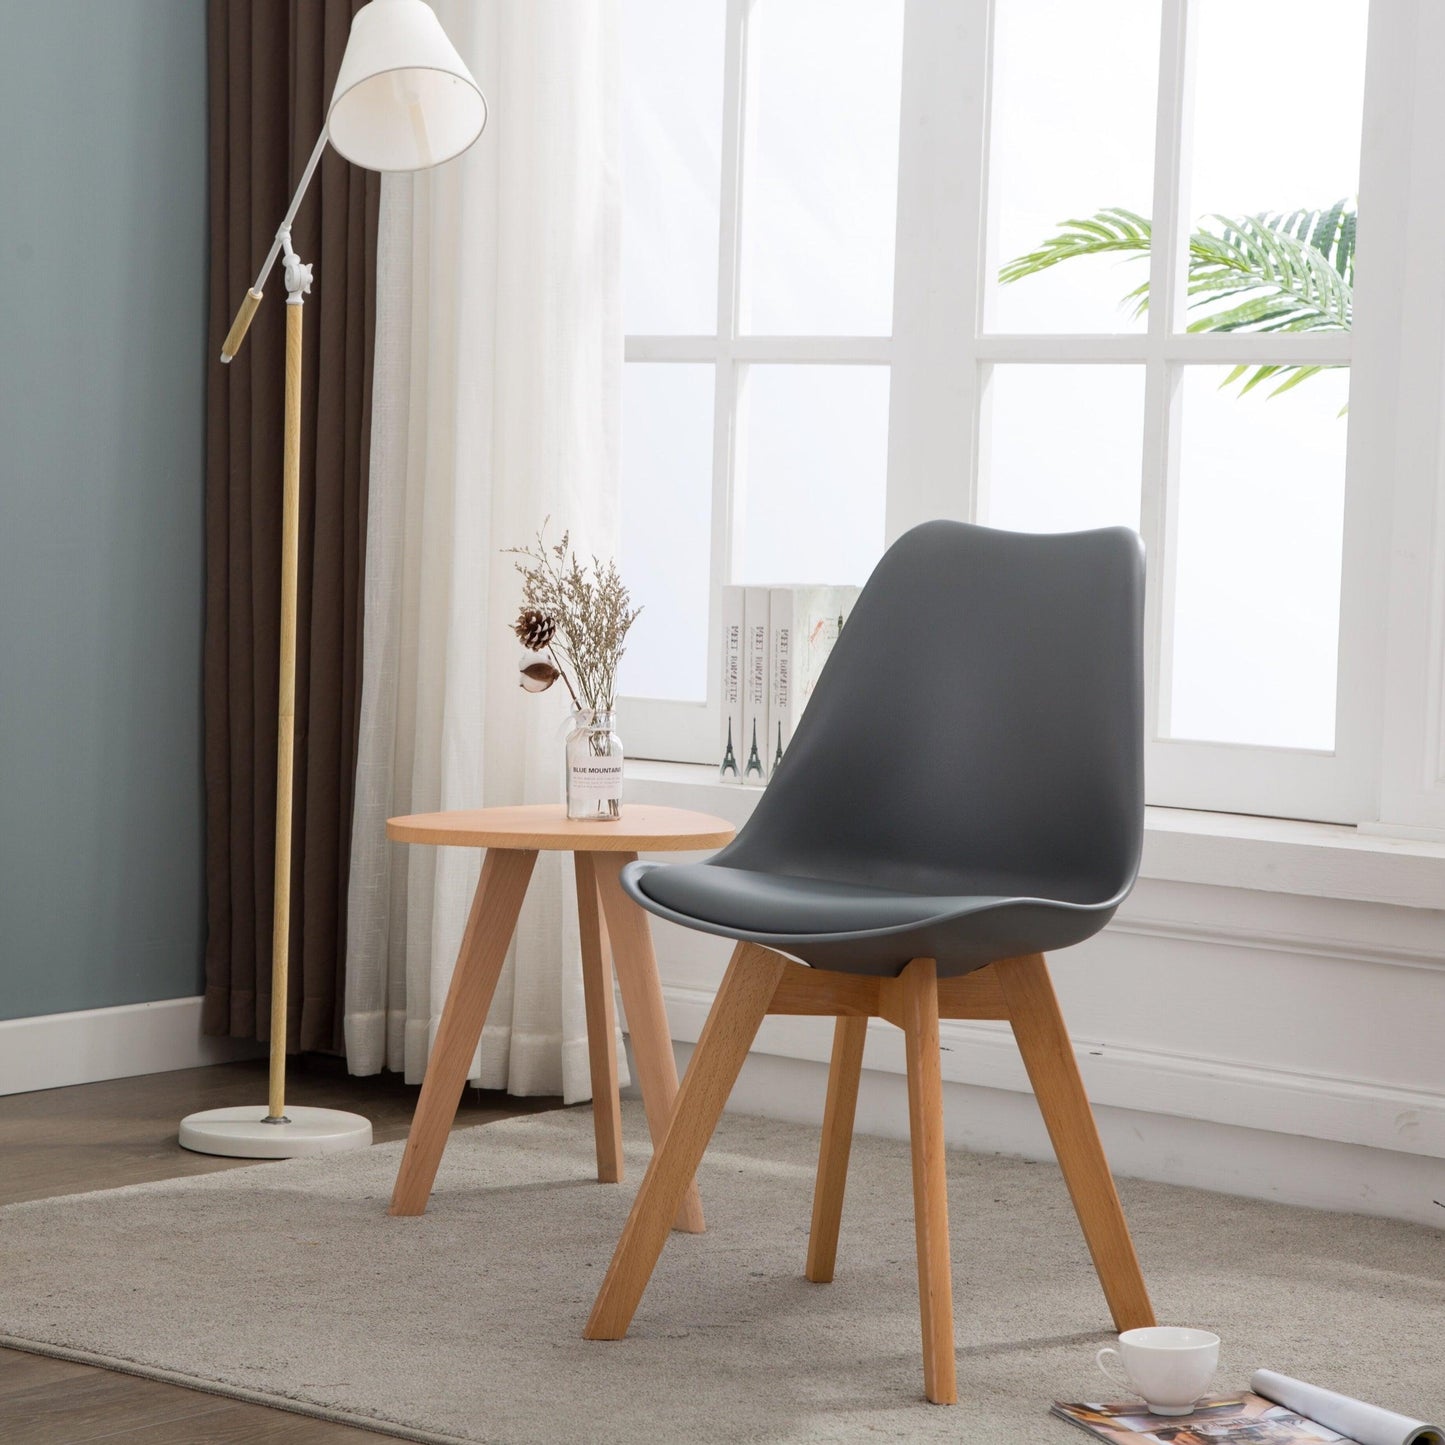 Ando Dining Chairs - Grey x 2 - Chotto Furniture